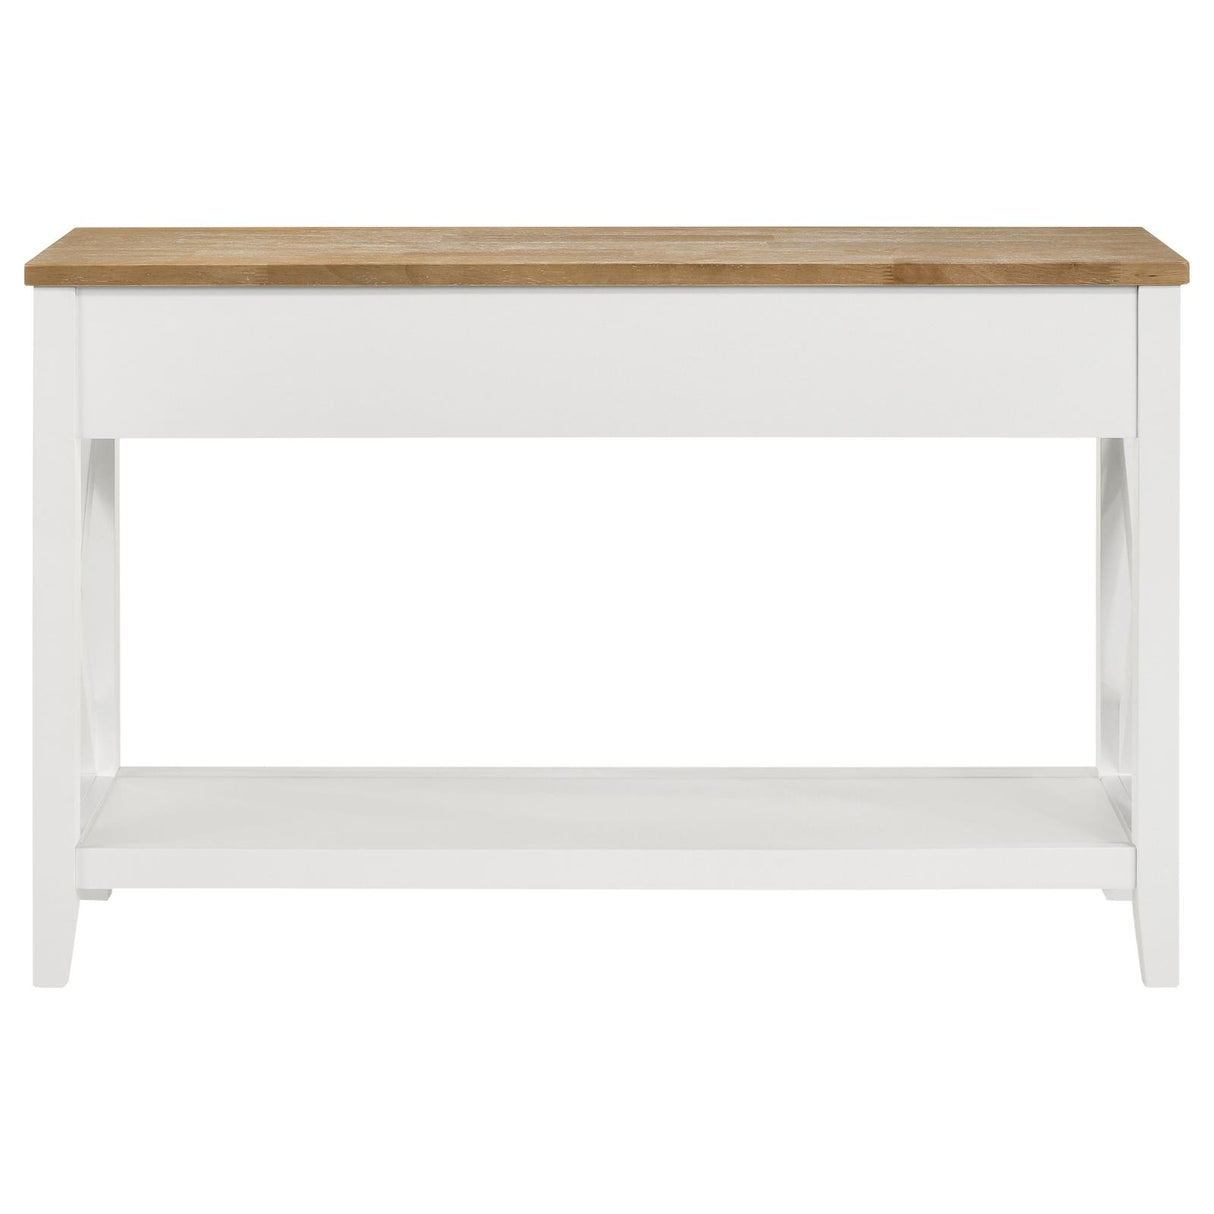 Maisy Rectangular Wooden Sofa Table With Shelf Brown and White - 708099 - Luna Furniture